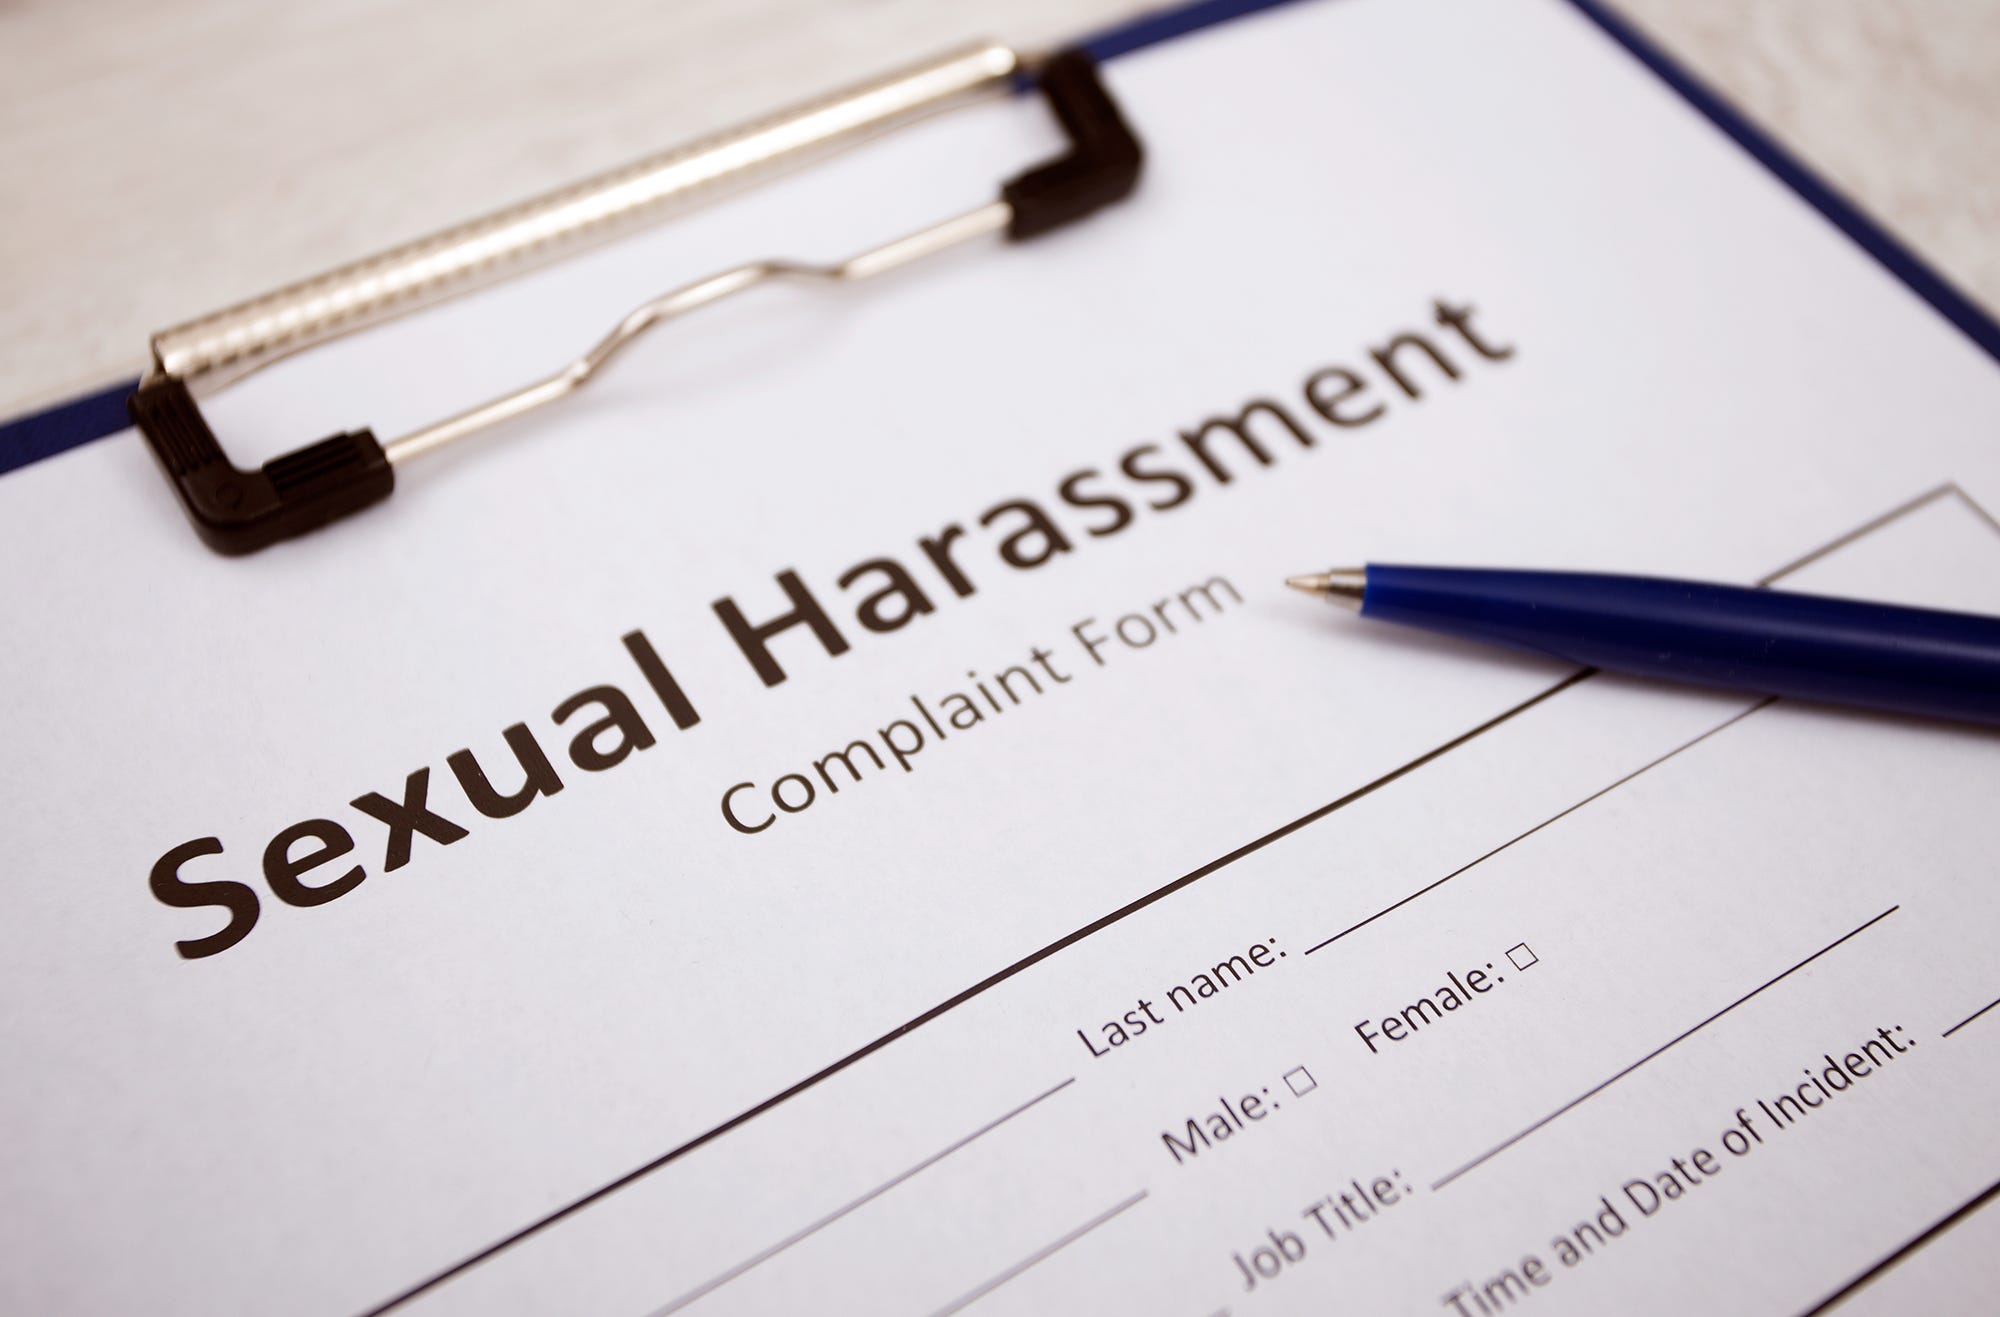 What Steps Should You Take if You’ve Been Sexually Harassed at Work?